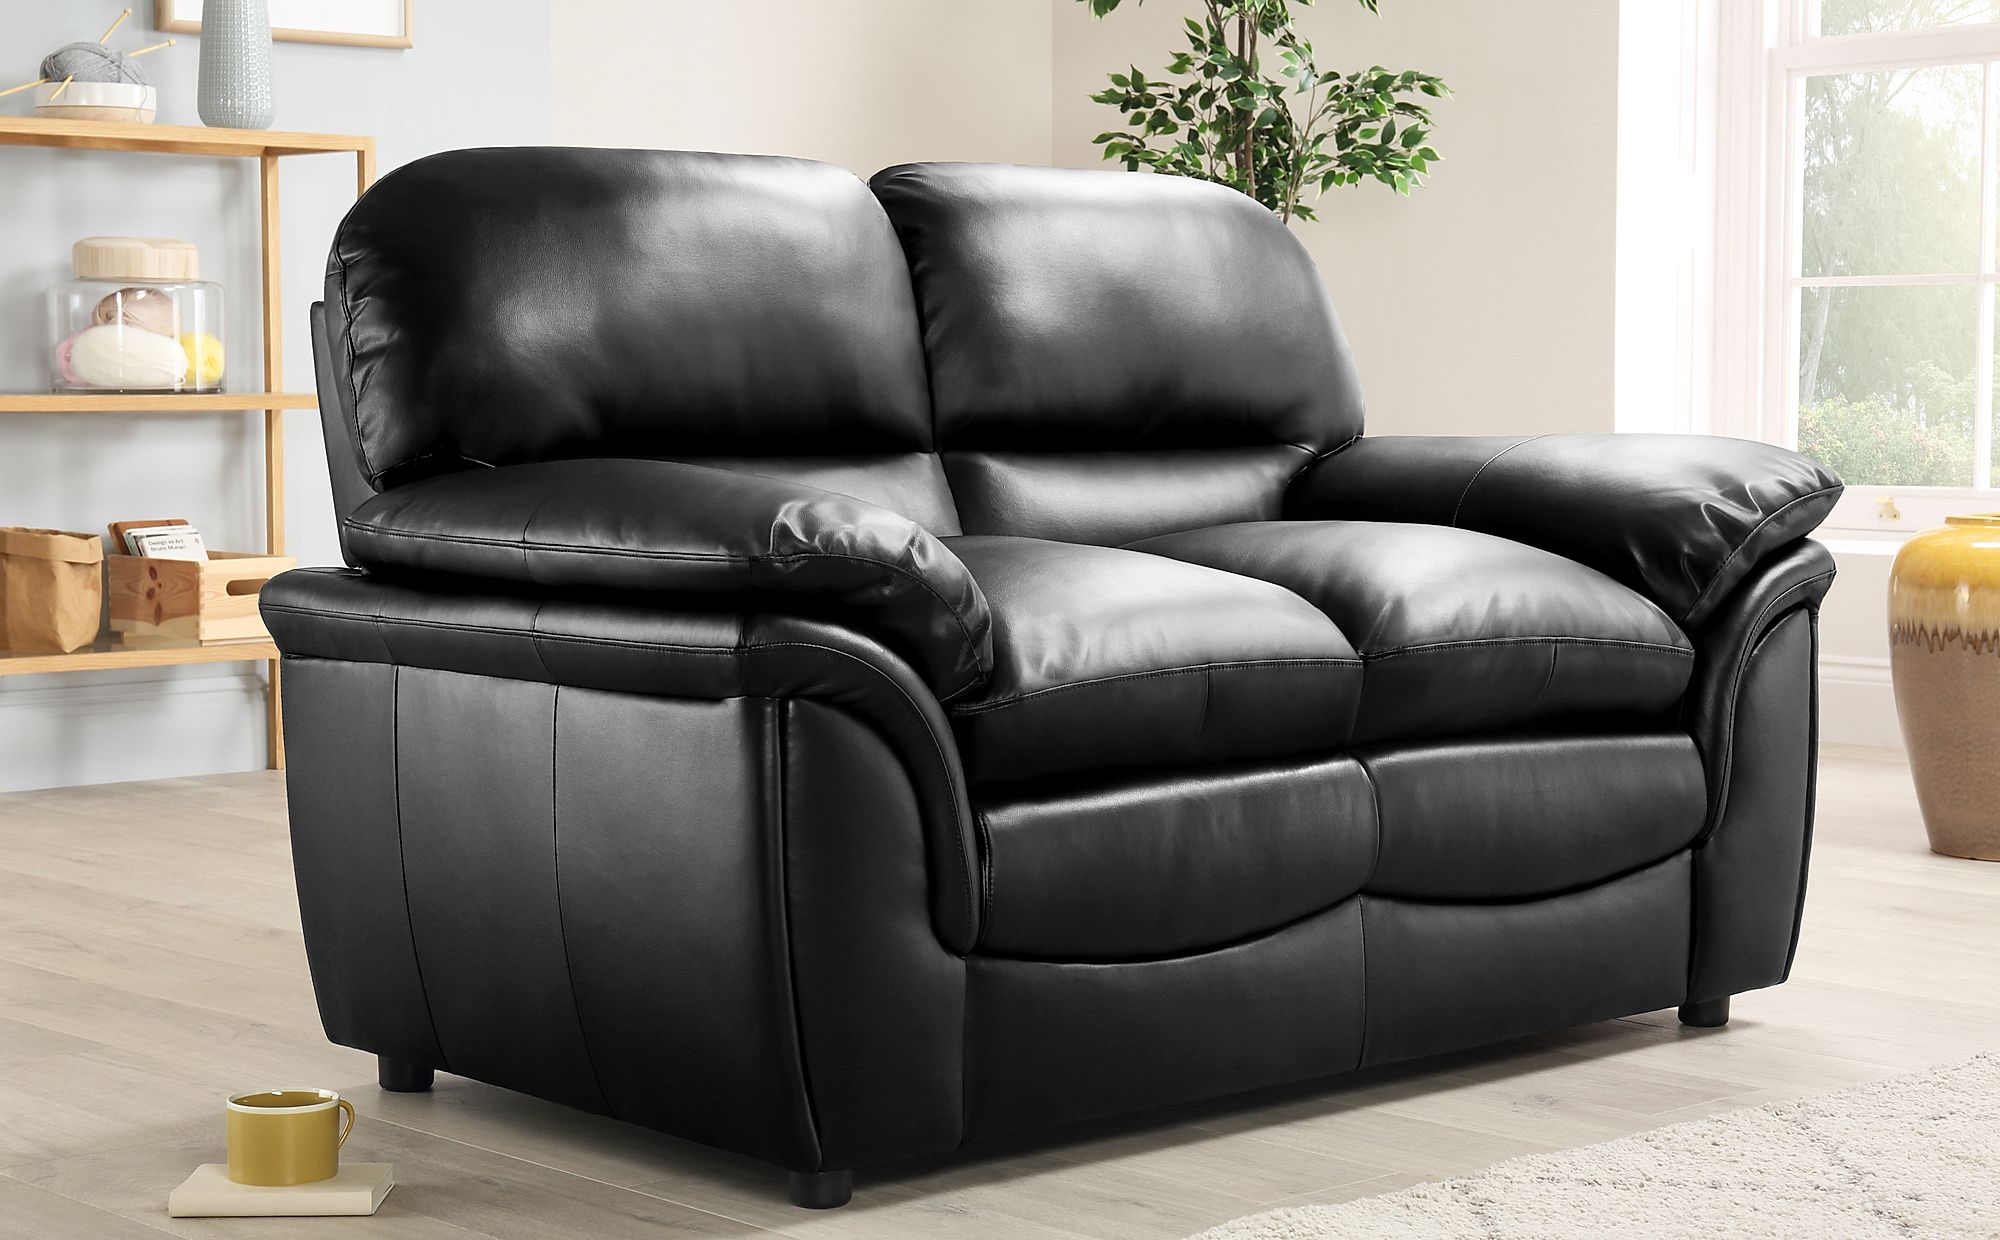 2 seater leather chaise sofa